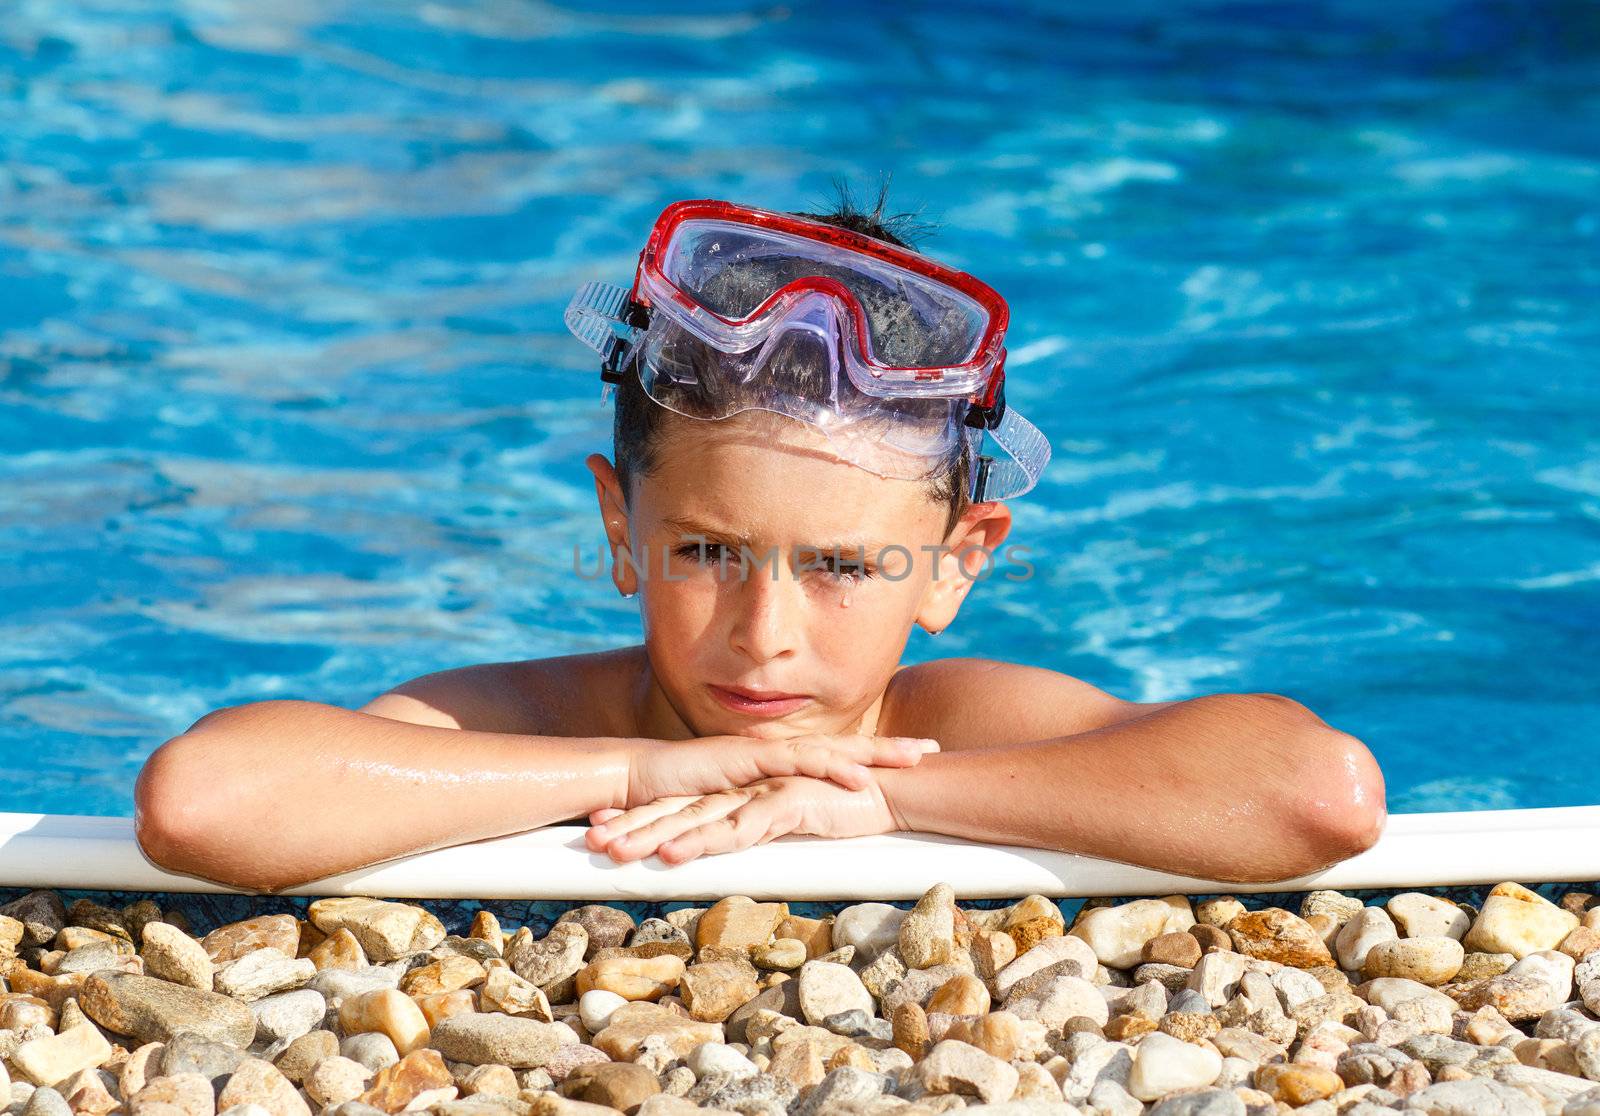 Boy with spectacles in the swimming pool with clear water